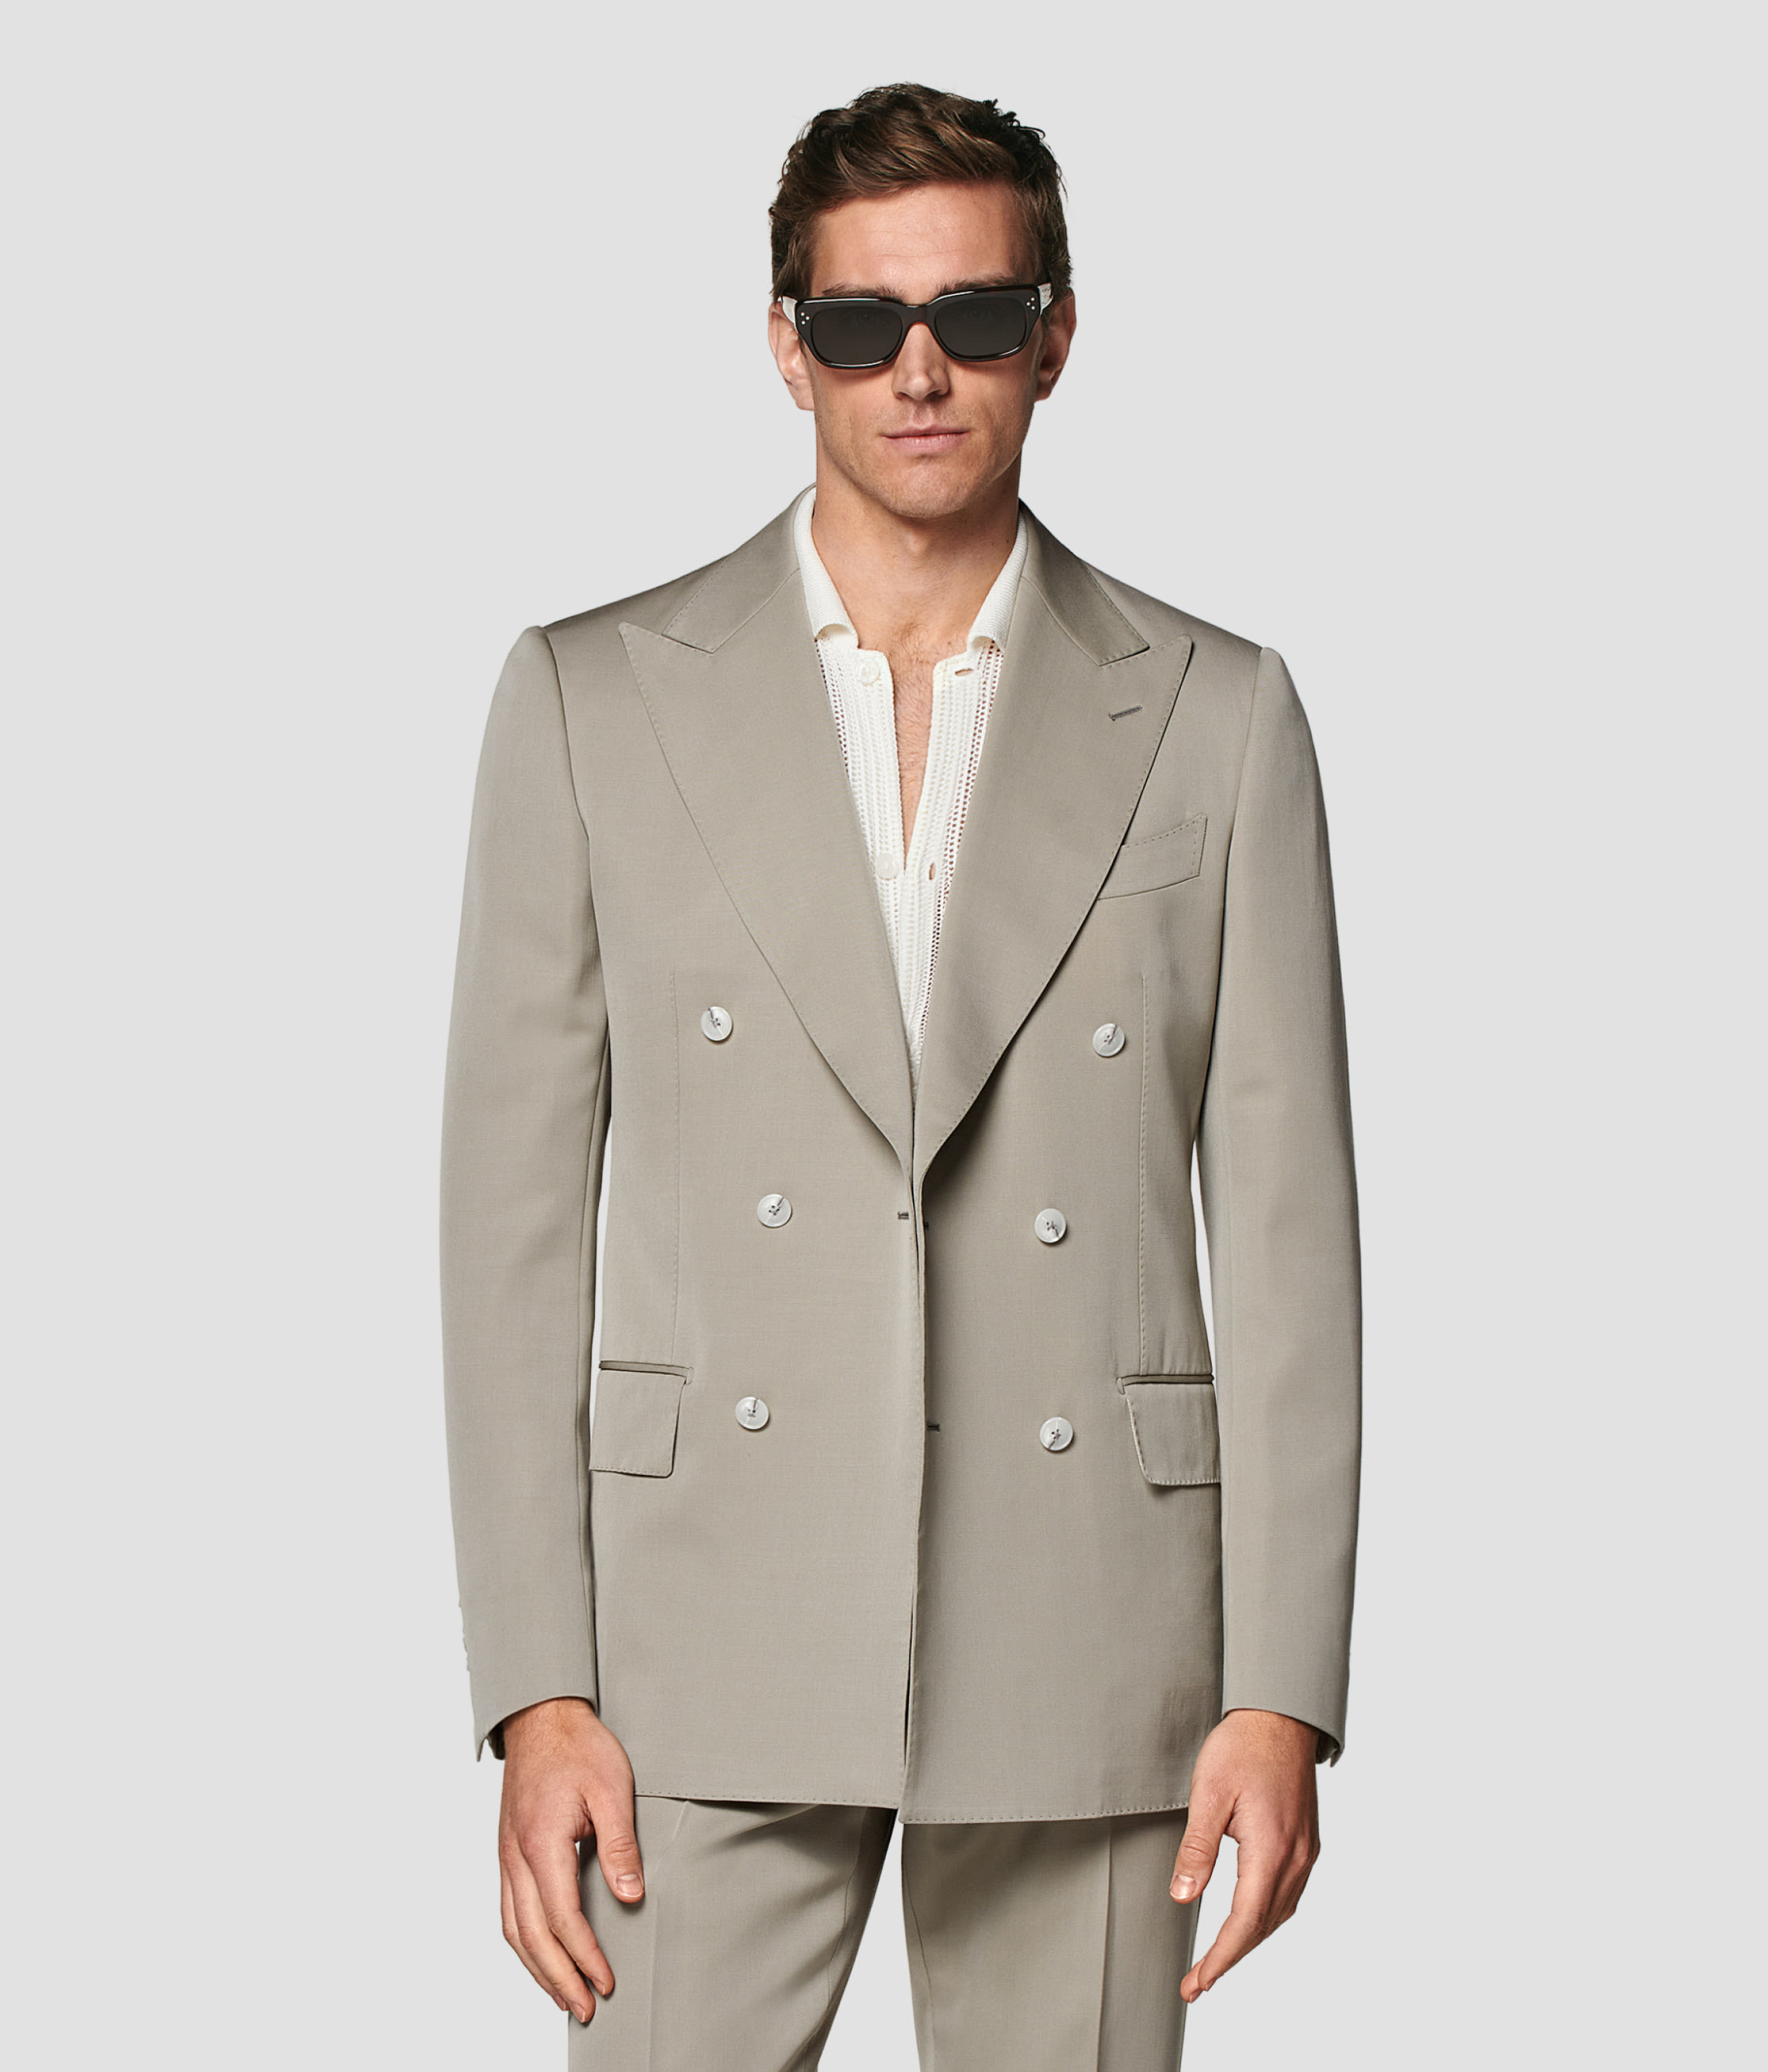 Men's Suits | Wedding, Formal & Custom Suits | SUITSUPPLY US